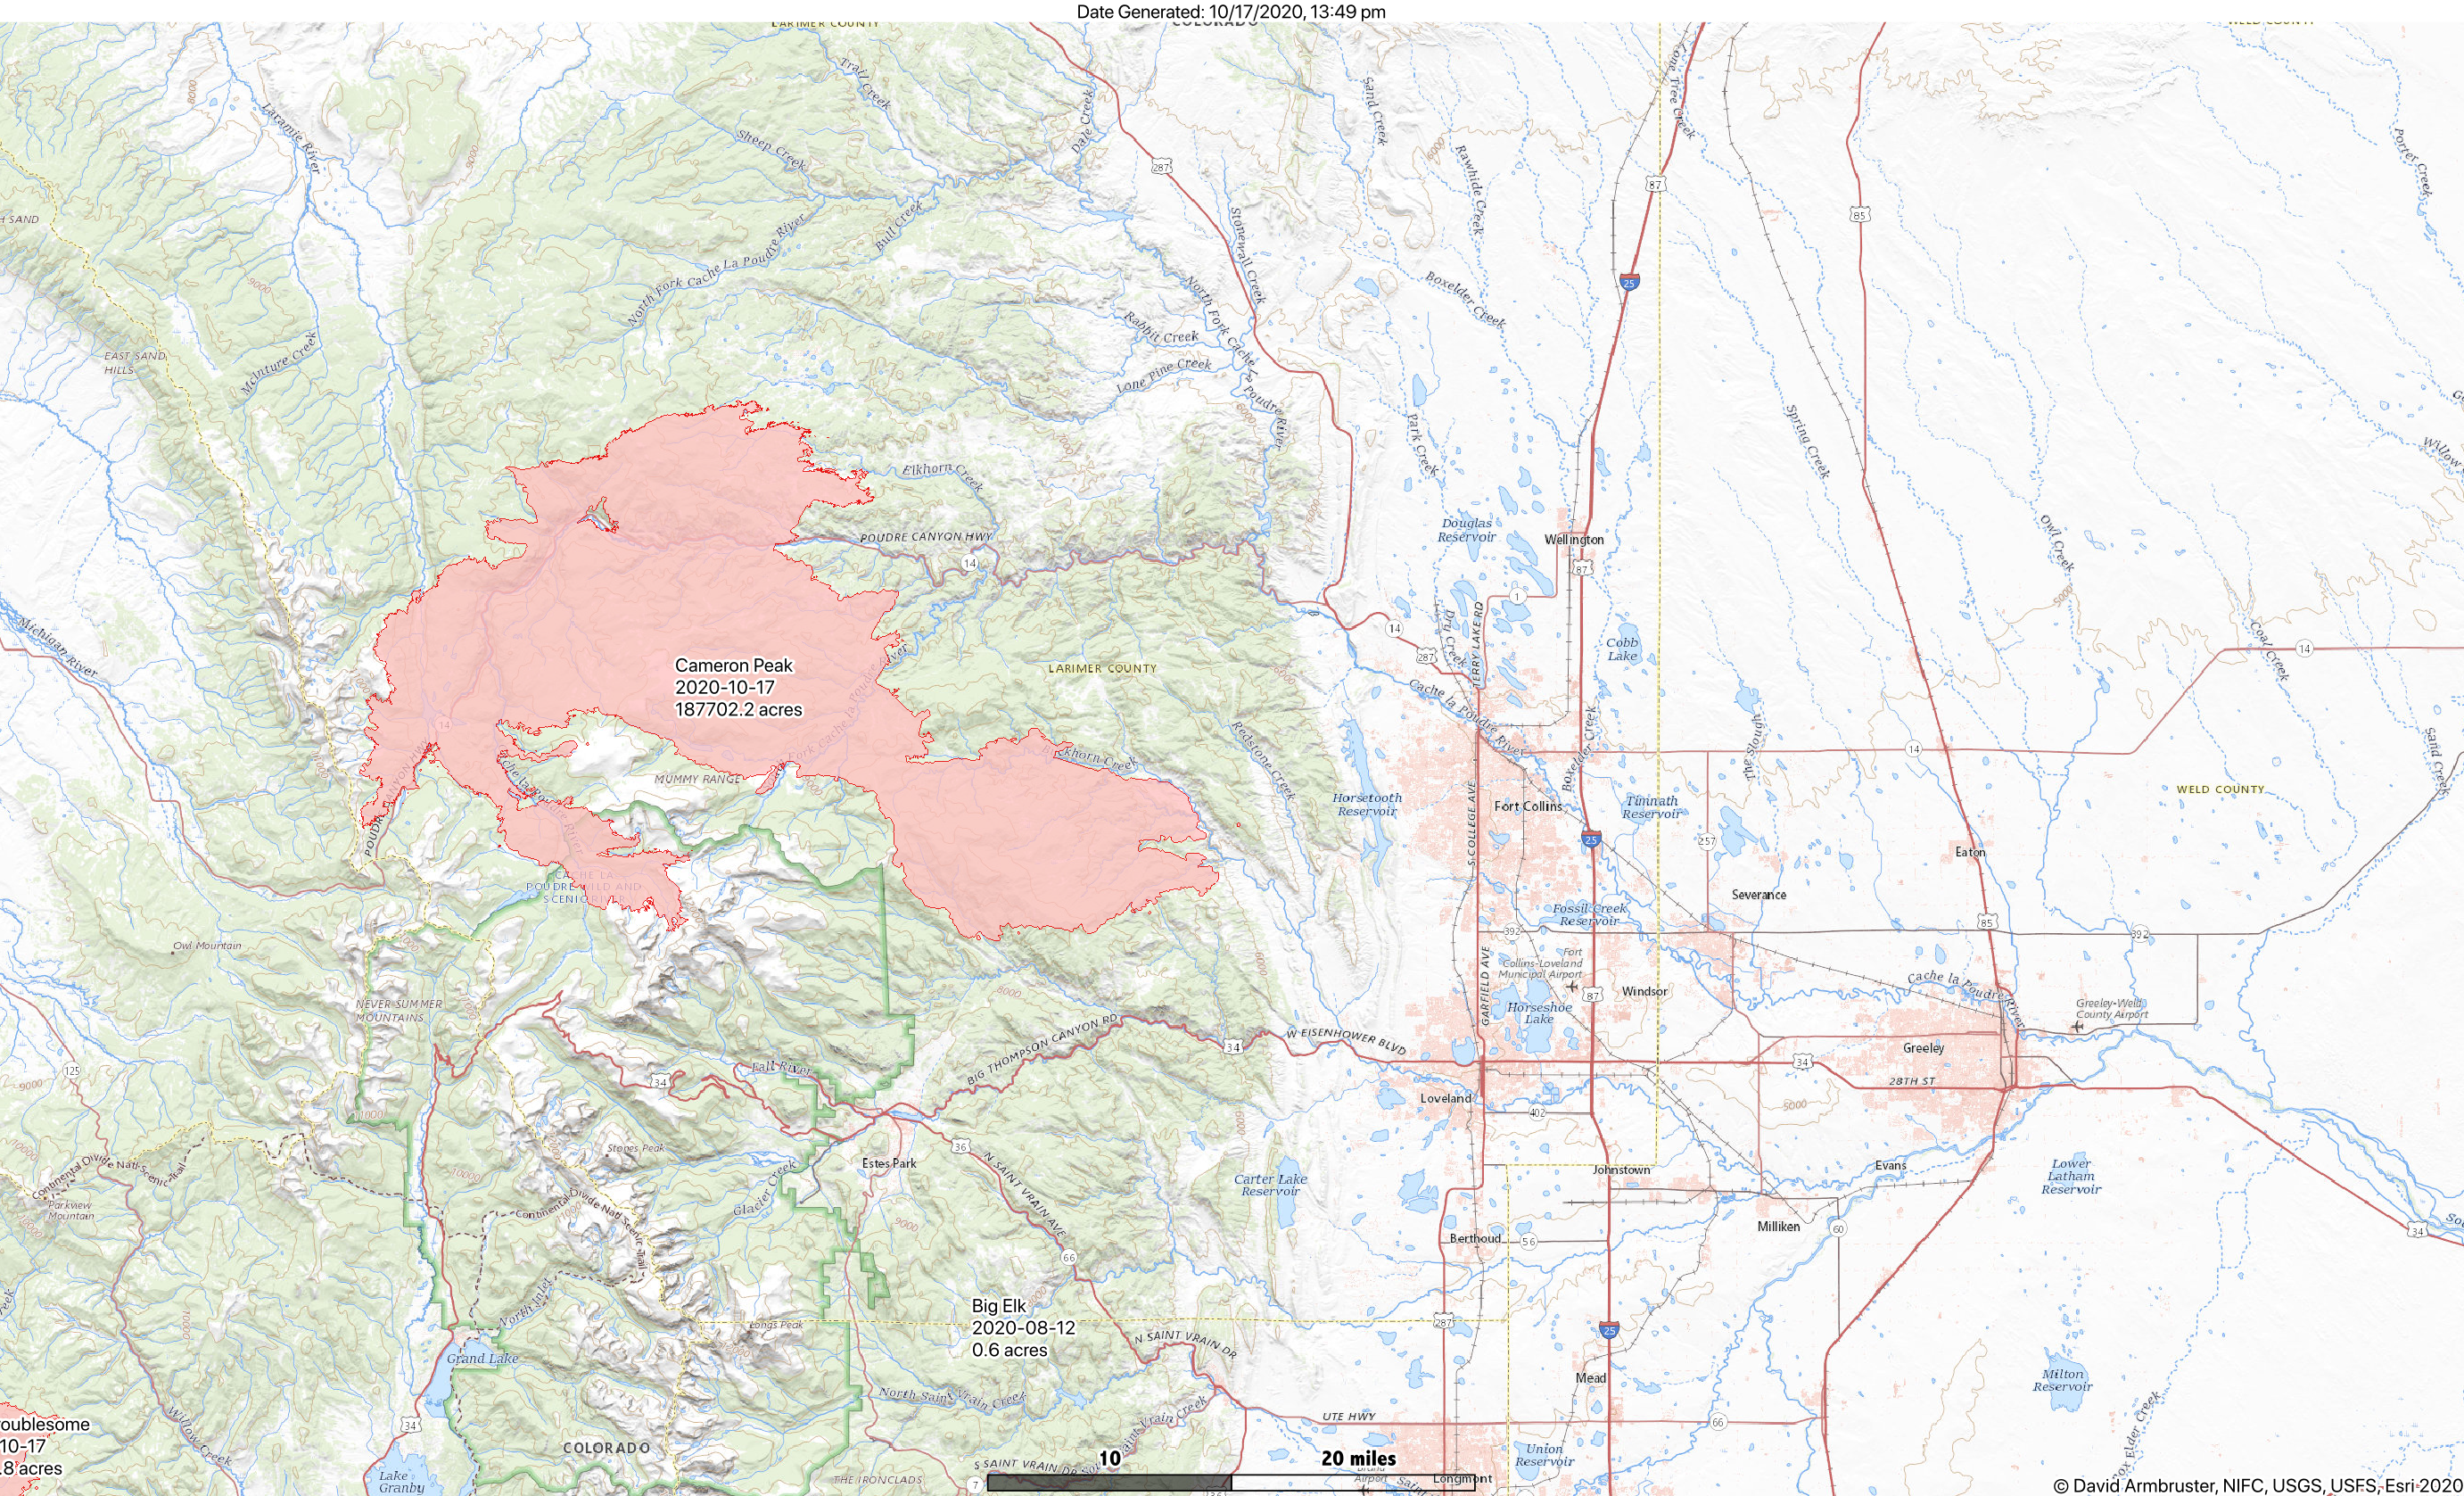 cameronpeakfire-oct172020_04.png